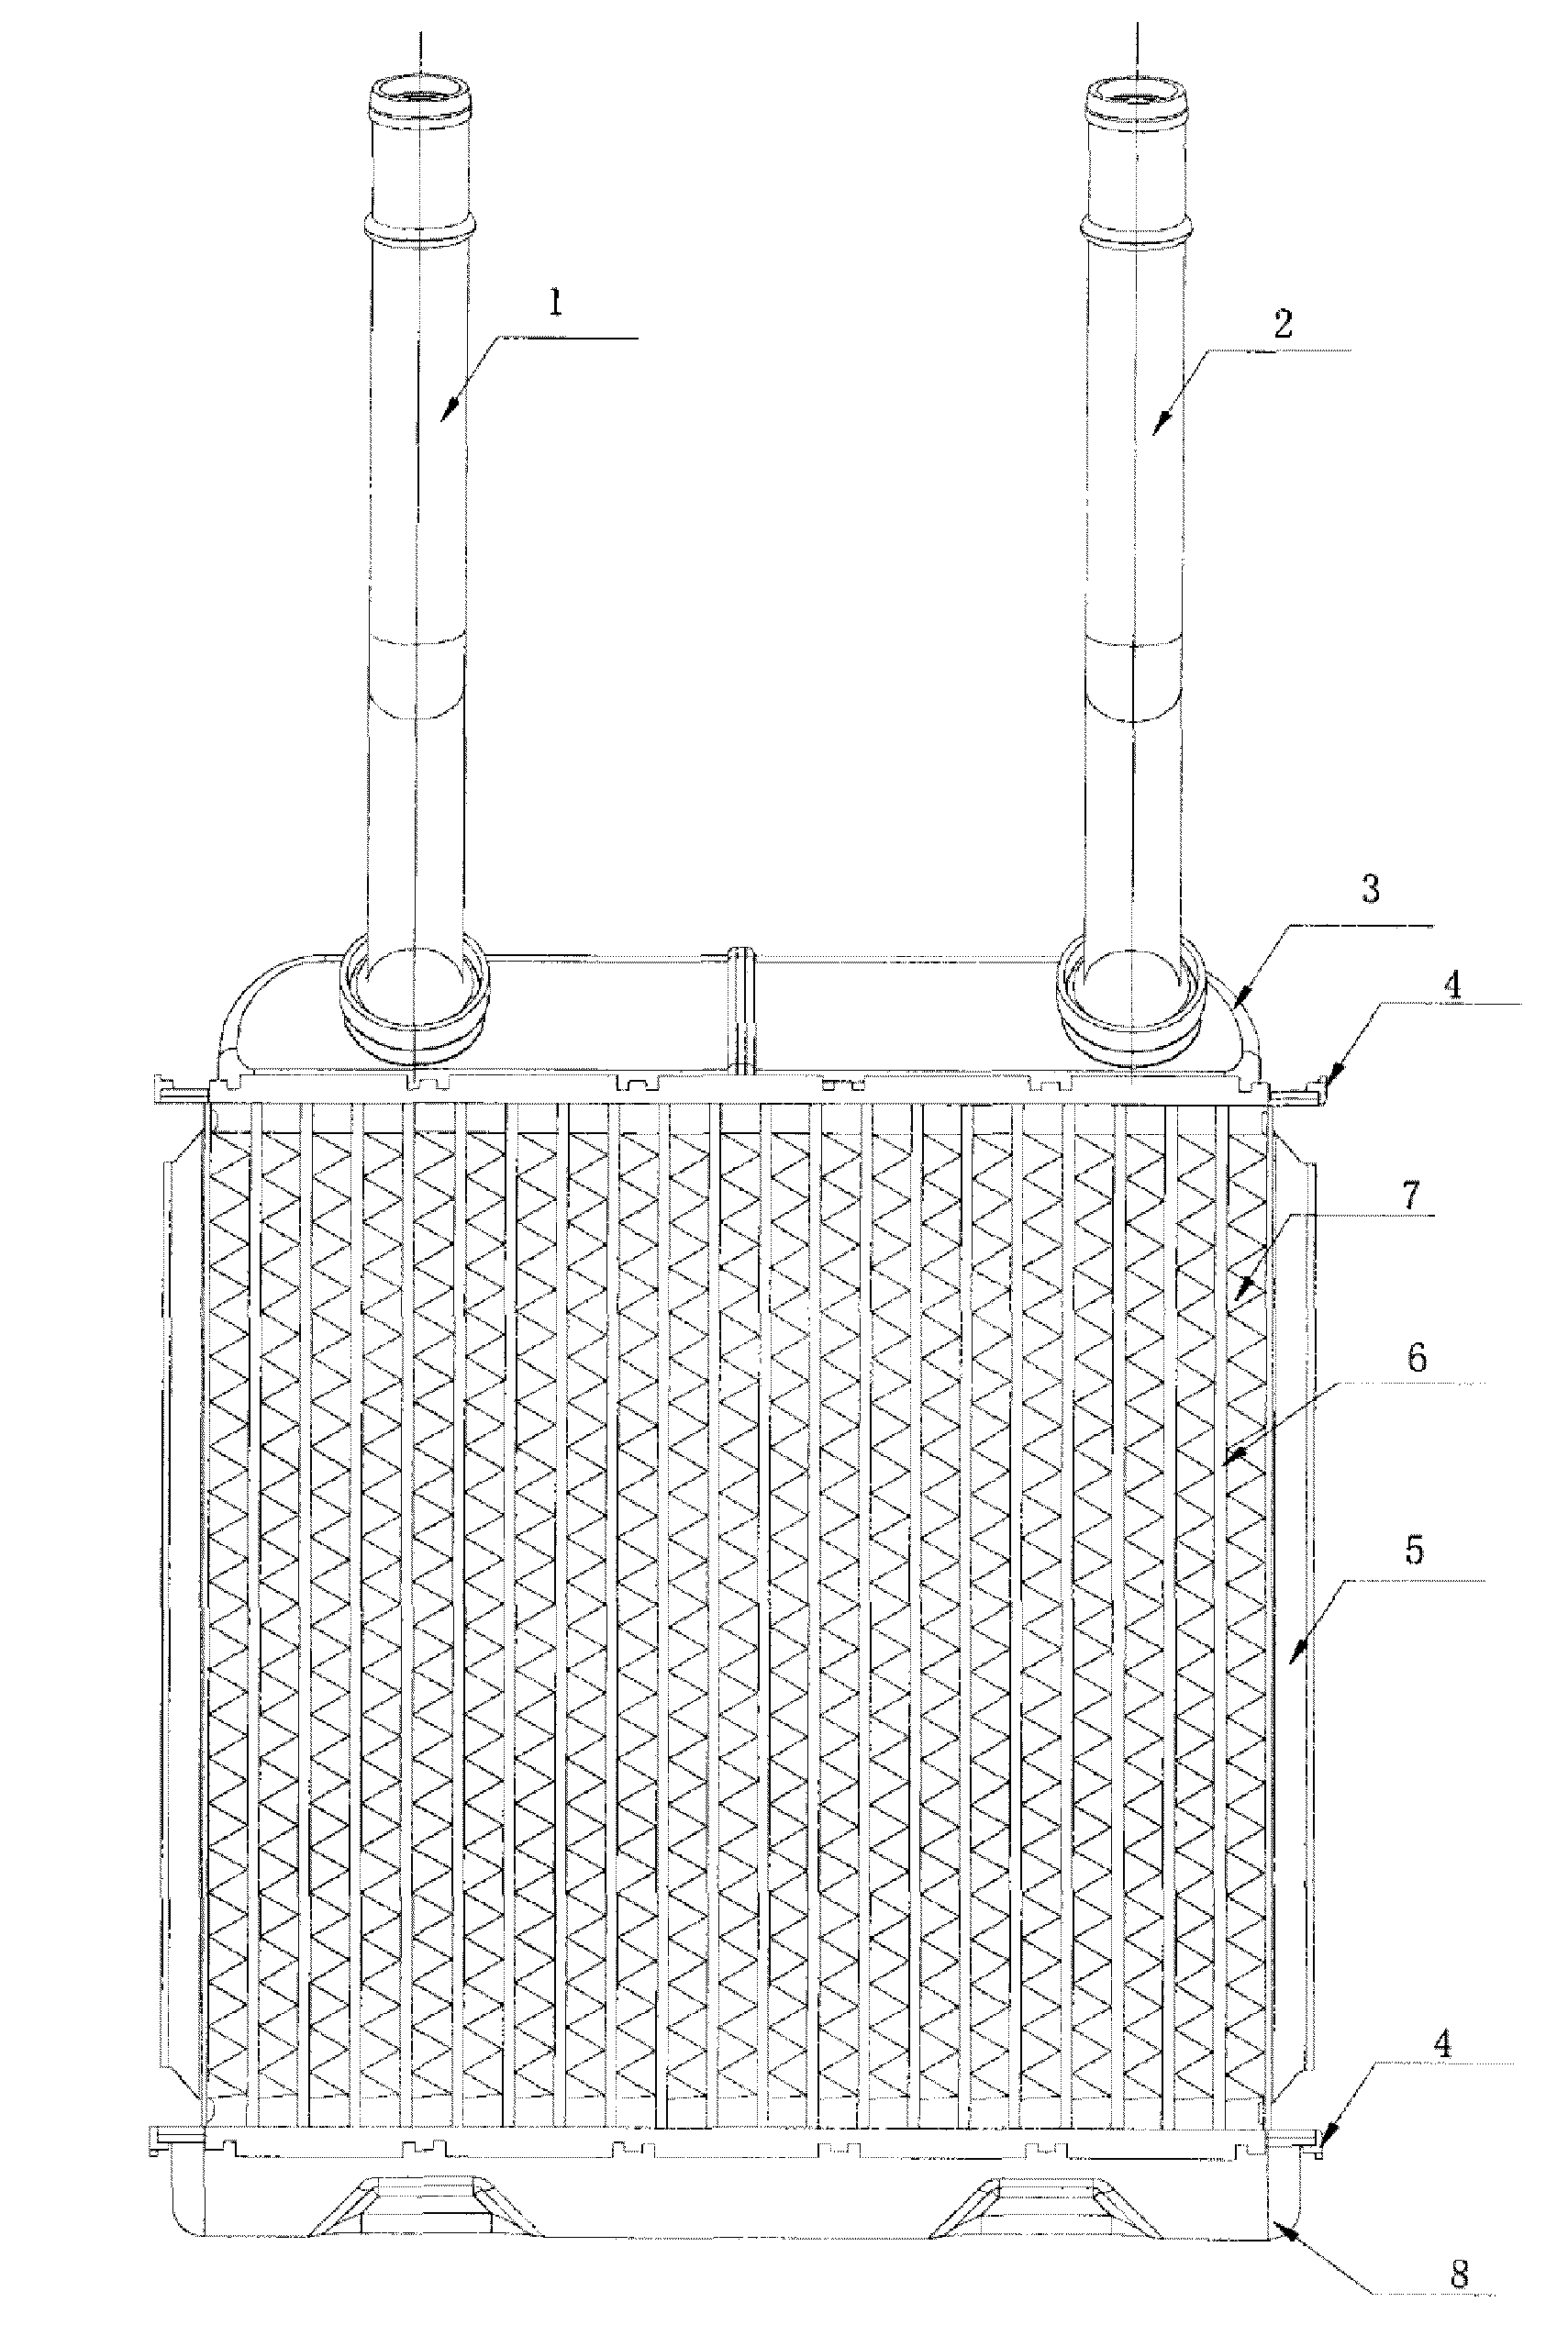 Binding Structure between Tank and Header of Automotive Heater Core